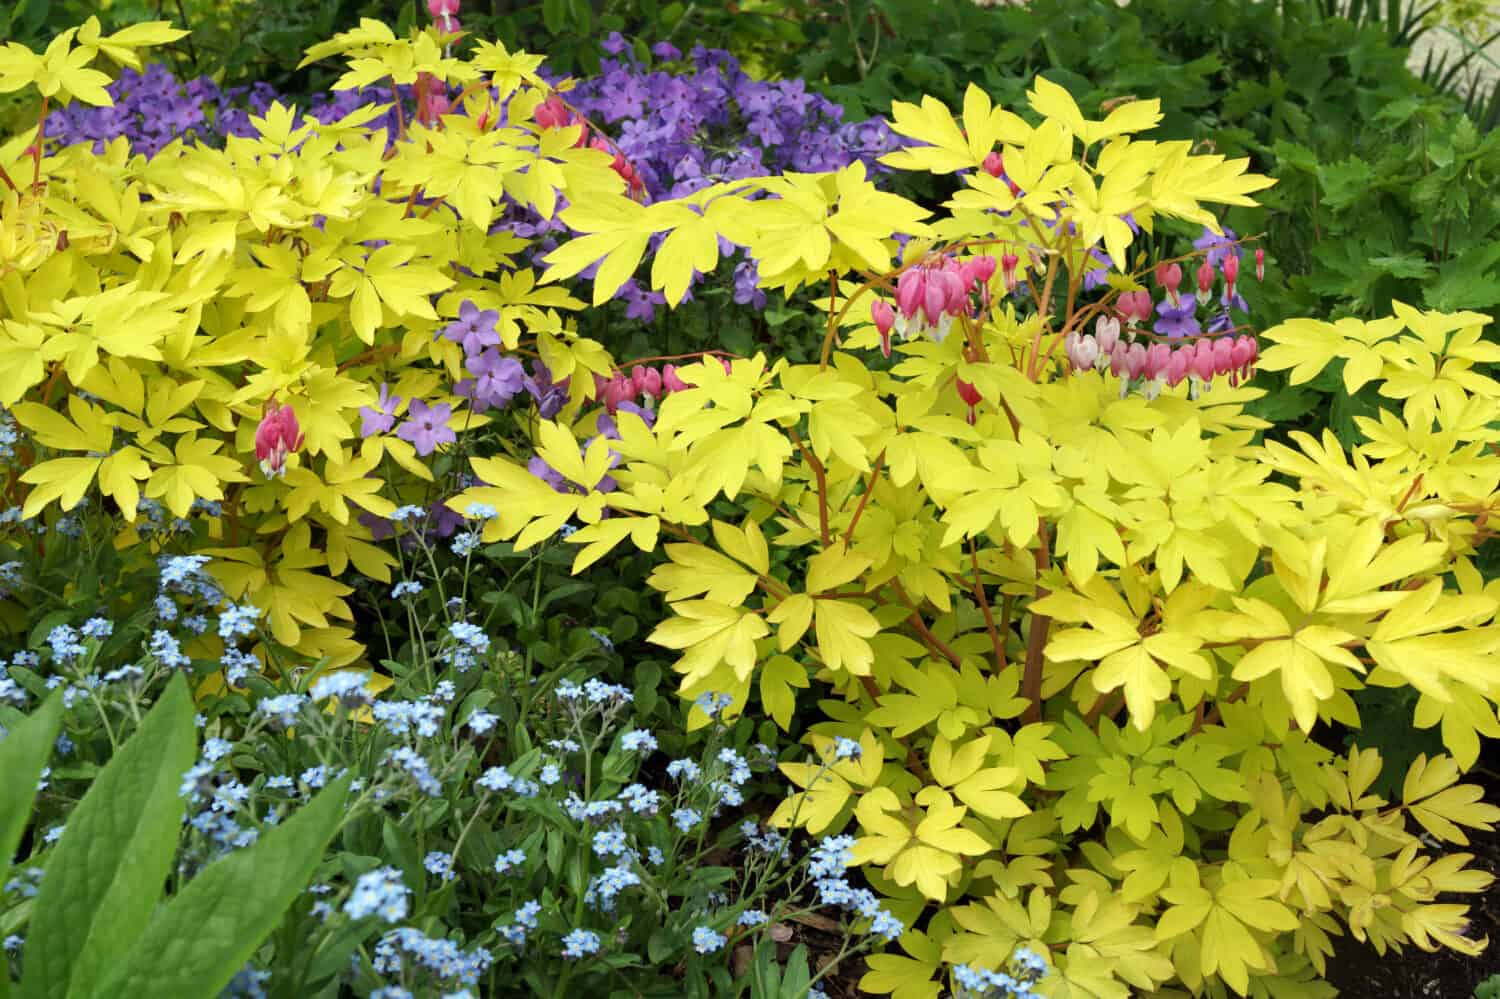 Vertical image of 'Gold Heart' bleeding heart (Lamprocapnos [formerly Dicentra] spectabilis)  with forget-me-nots (Myosotis sylvatica) and 'Sherwood Purple' creeping phlox (Phlox stolonifera)